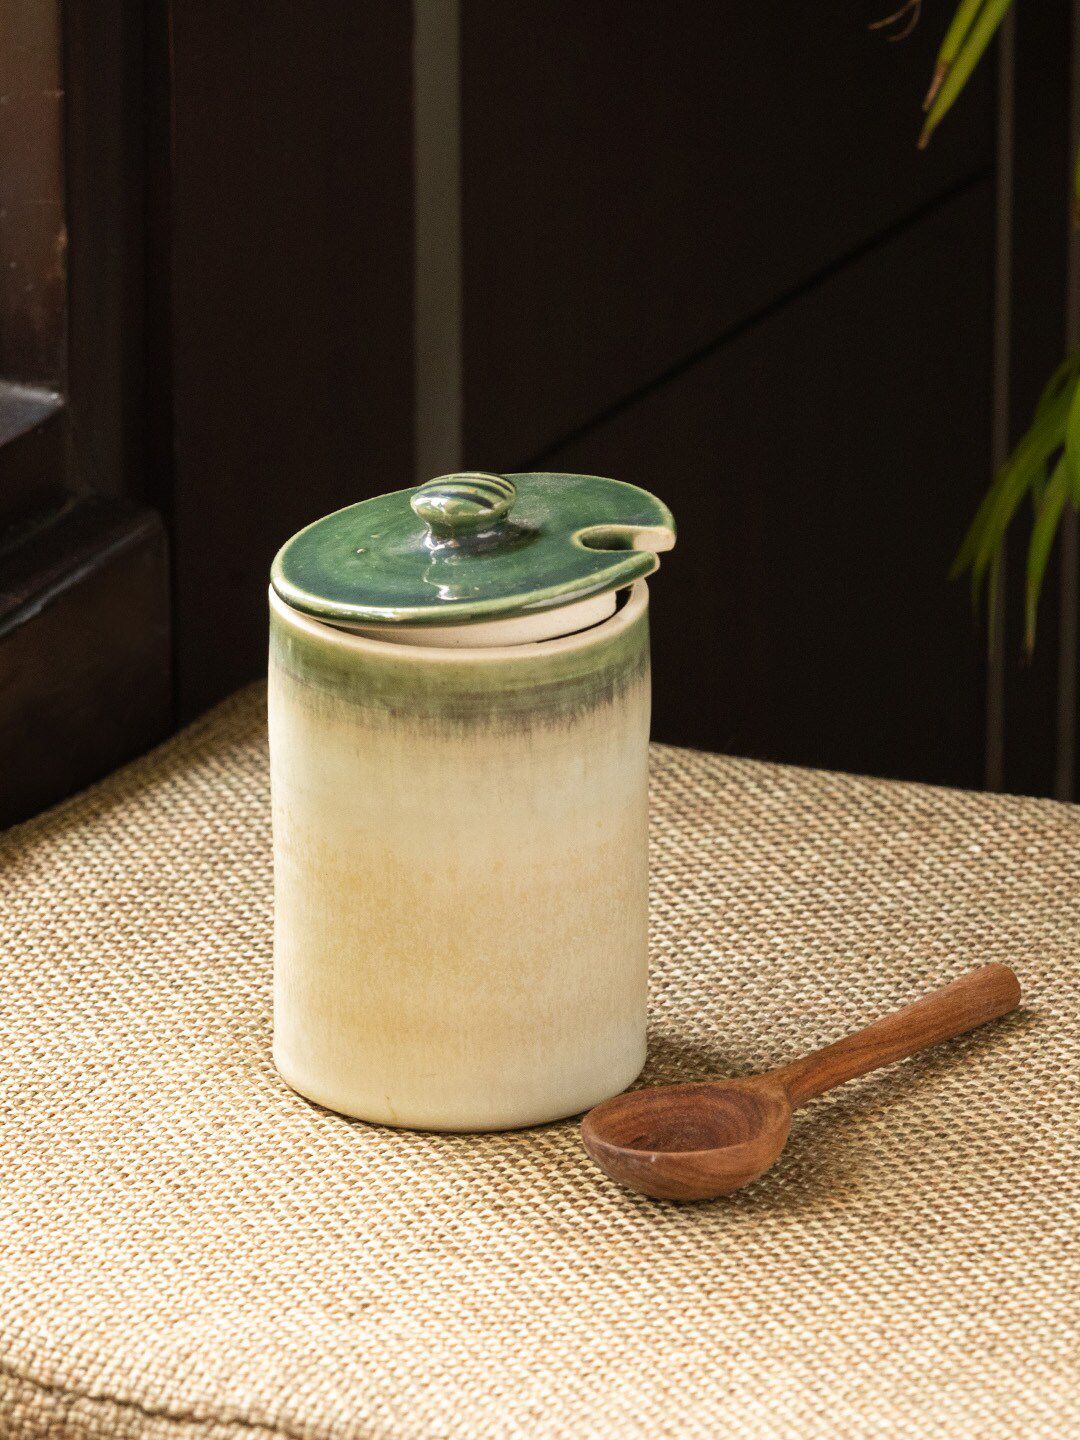 ExclusiveLane Cream-Toned & Brown Solid Pickle Perks' Studio Pottery Ceramic Pickle & Jam Jar With Wooden Spoon Price in India